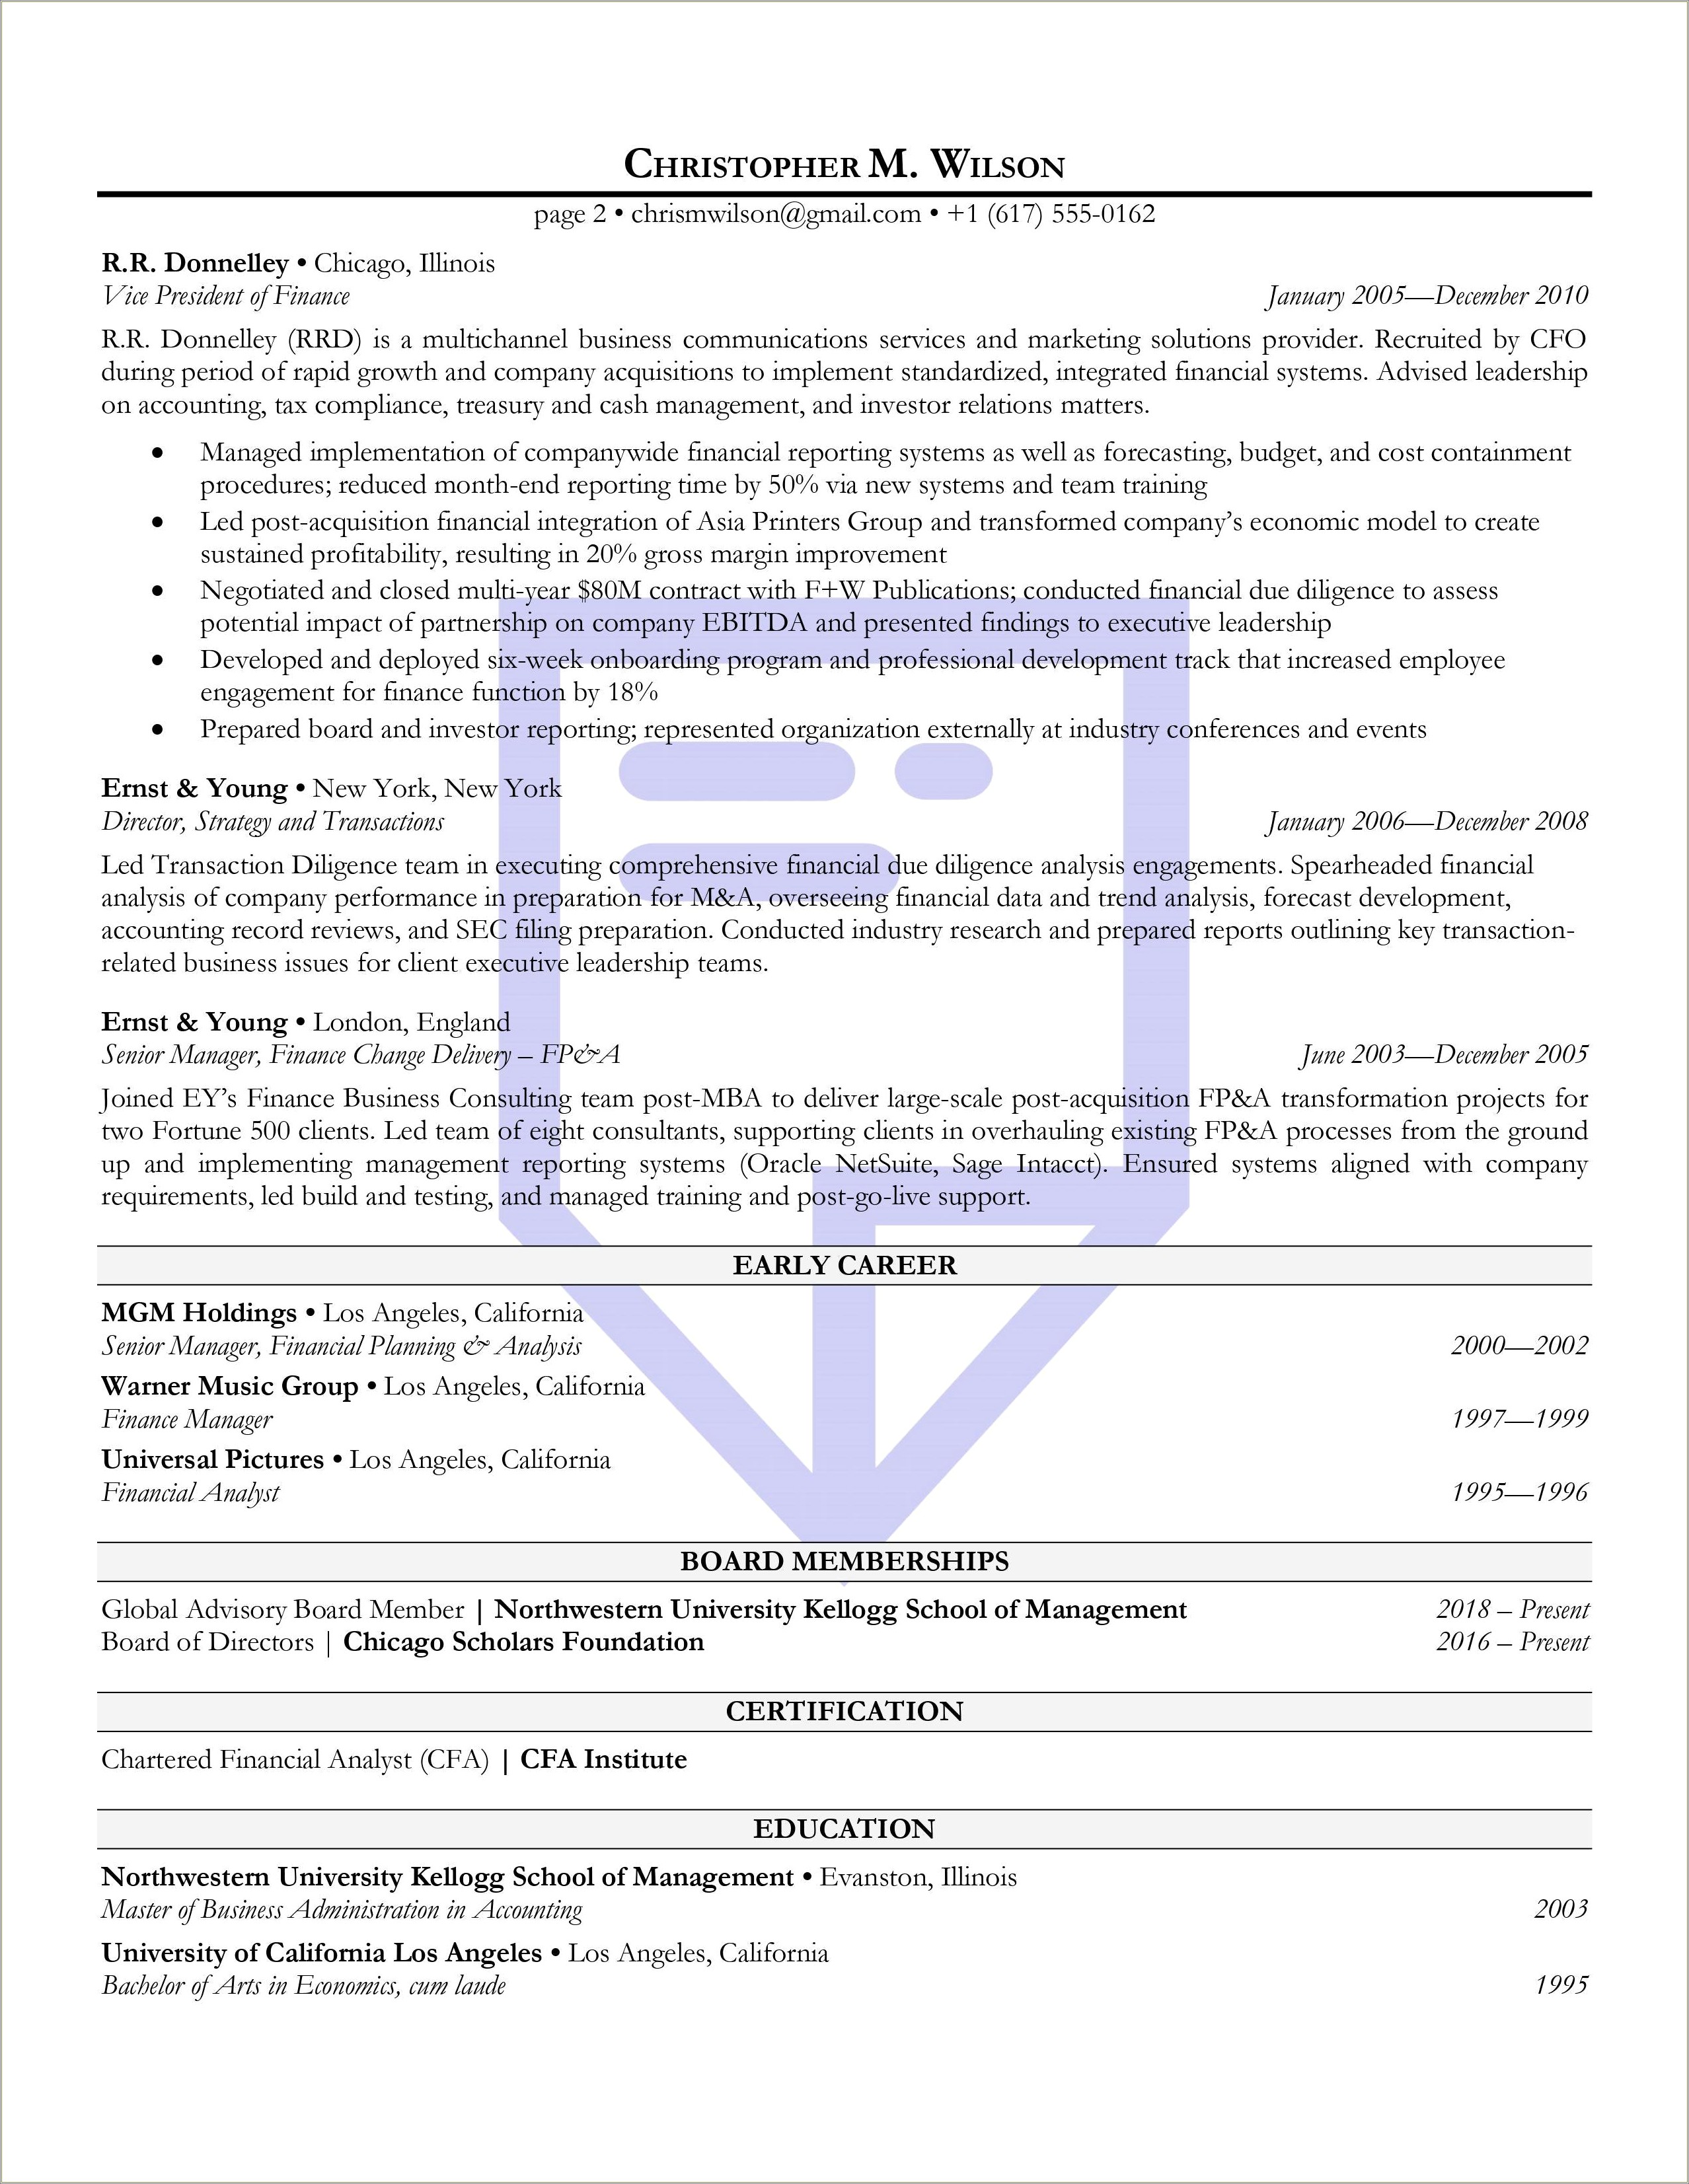 Sample High School Resume For Ivy League